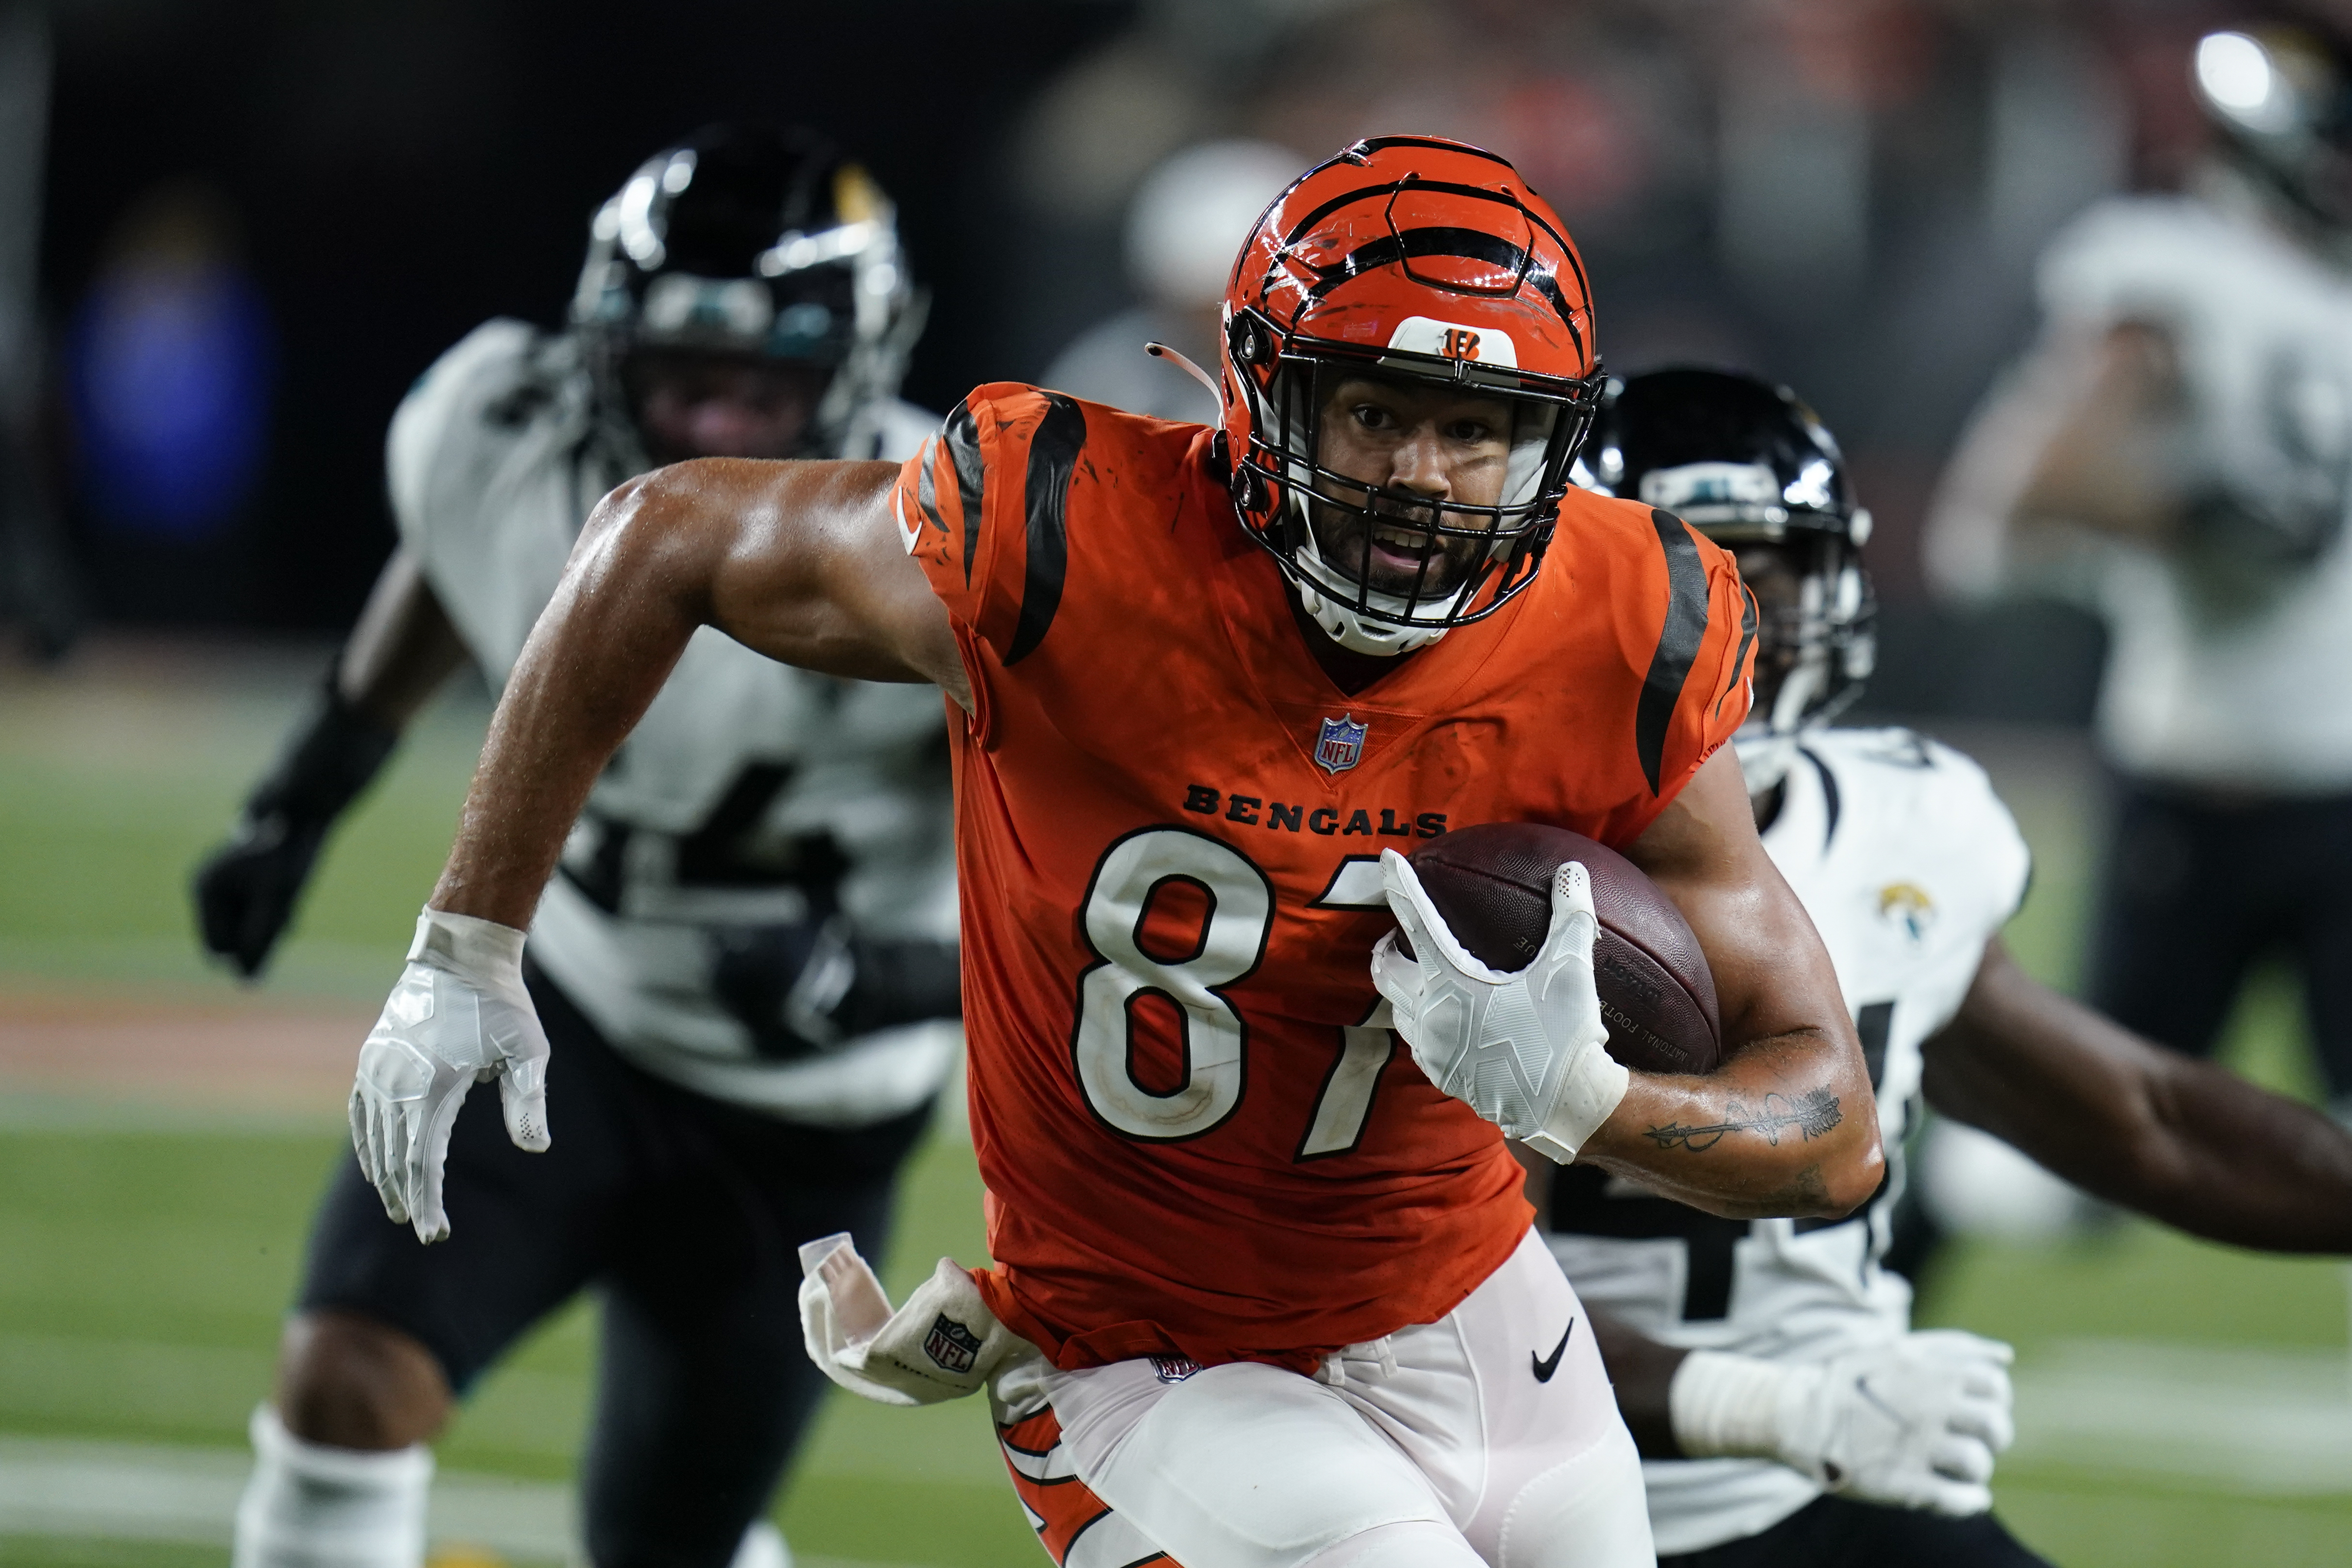 Archdeacon: 'Suit guy' outfits new Bengals star for success